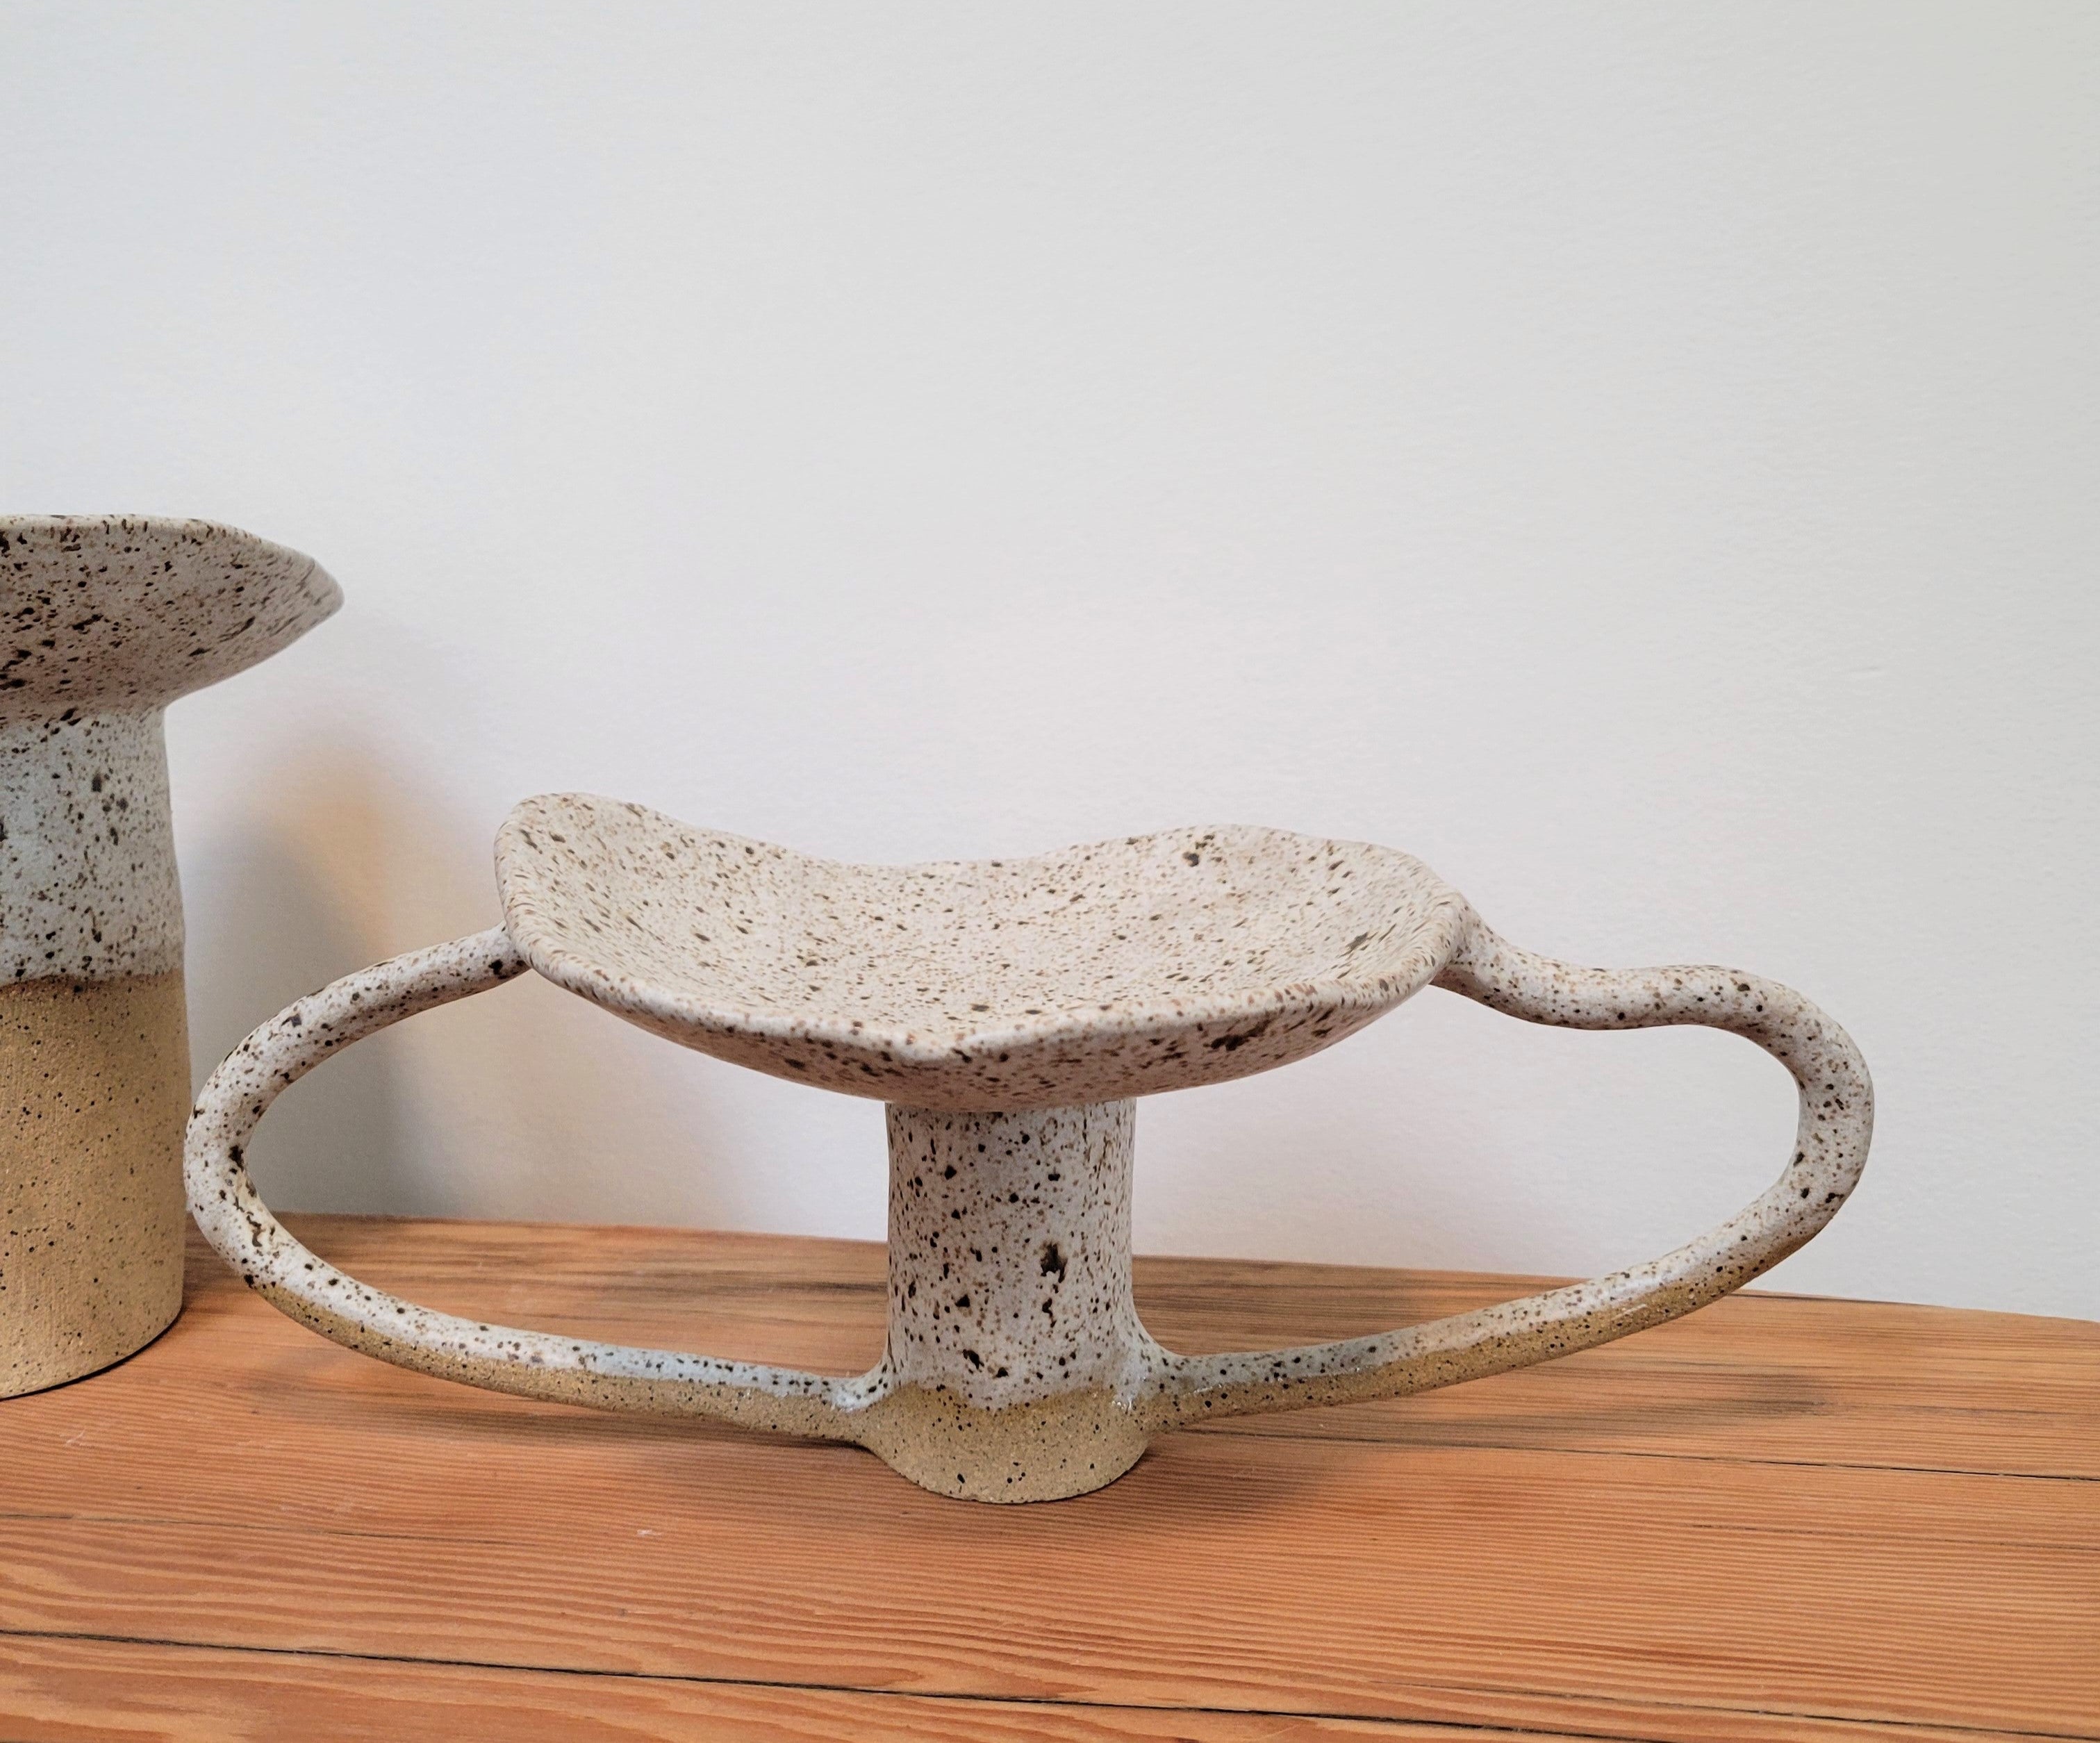 Quail Egg Pedestal Dish - Speckled Brown Cream Ceramic Pottery Sculpture Dish Double Handle- Made to Order